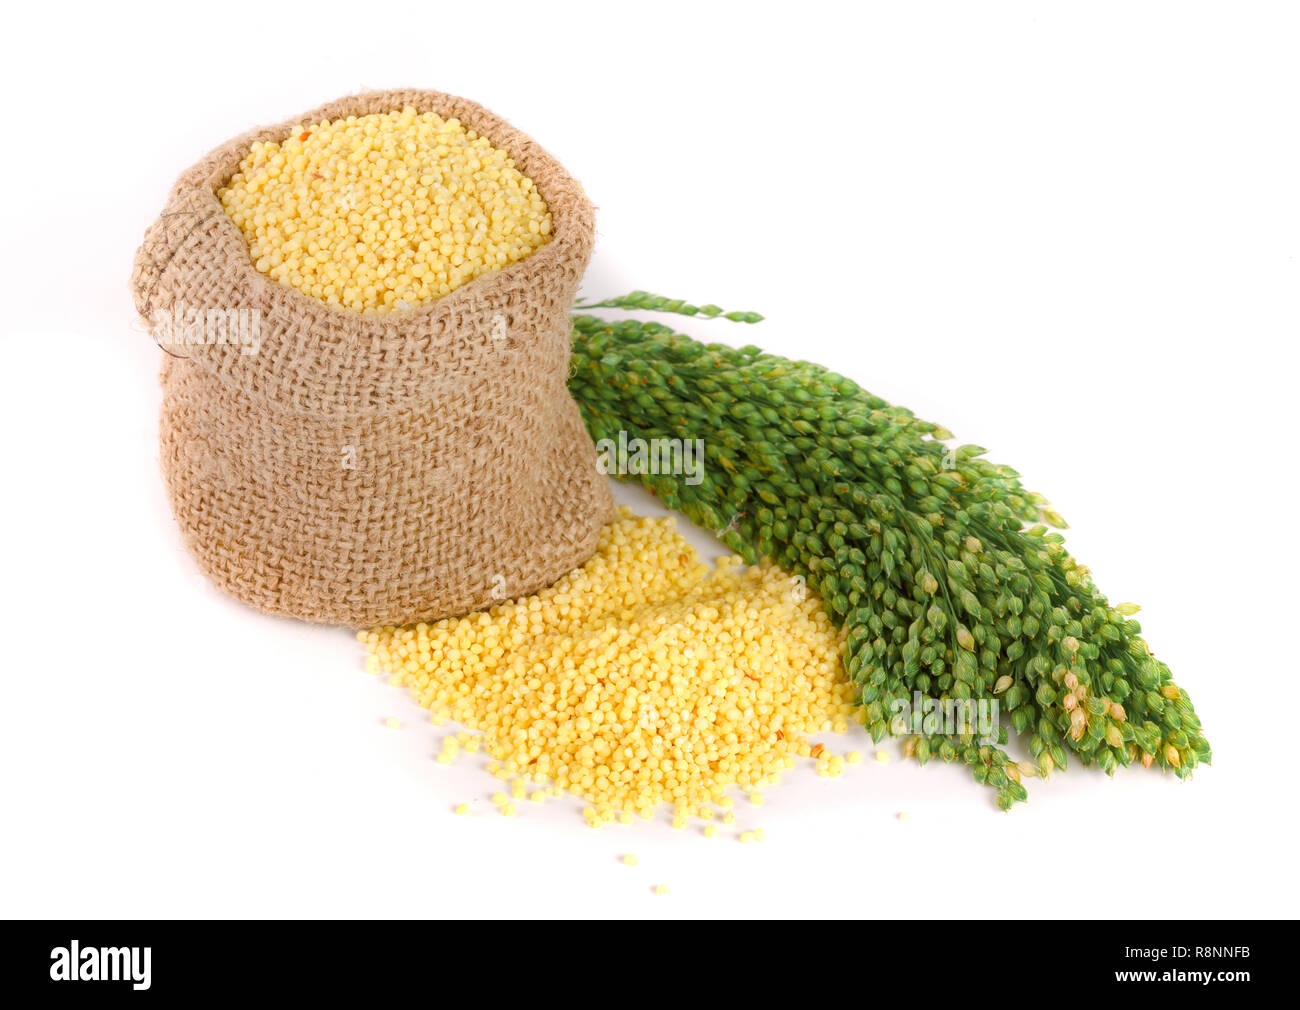 Millet in a bag with green spikelets isolated on white background Stock Photo